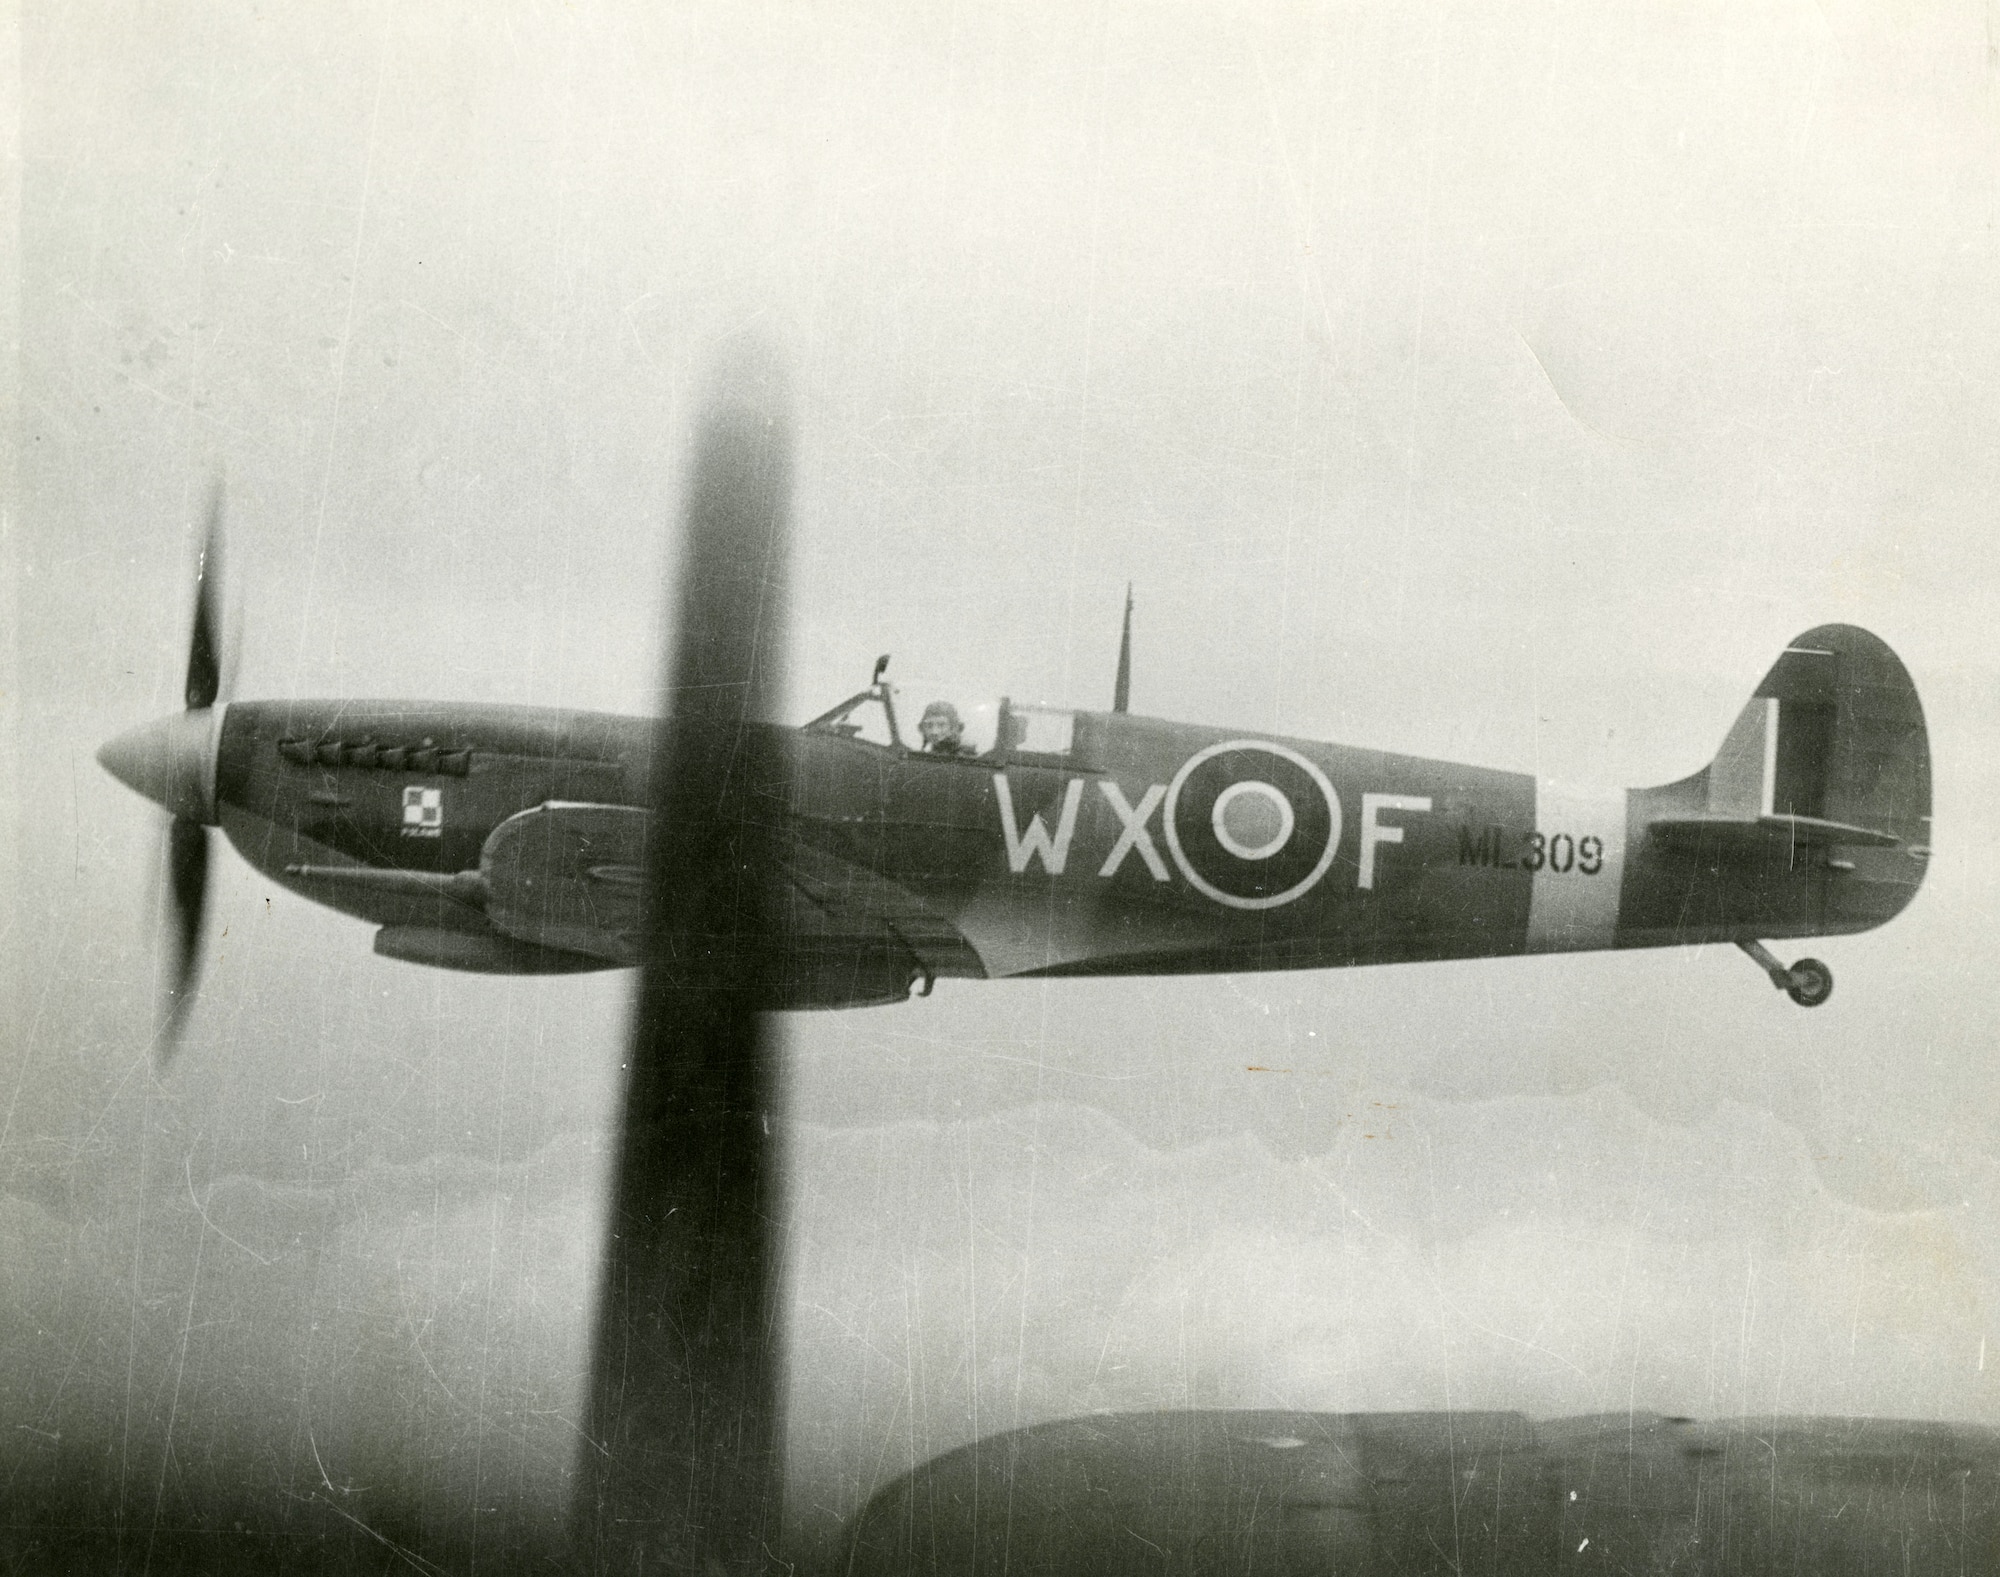 Royal Air Force (RAF) Spitfire off the wing of a B-17.  Flown by RAF and American pilots, the short-ranged Spitfire was the USAAF’s heavy bomber escort until mid-1943.